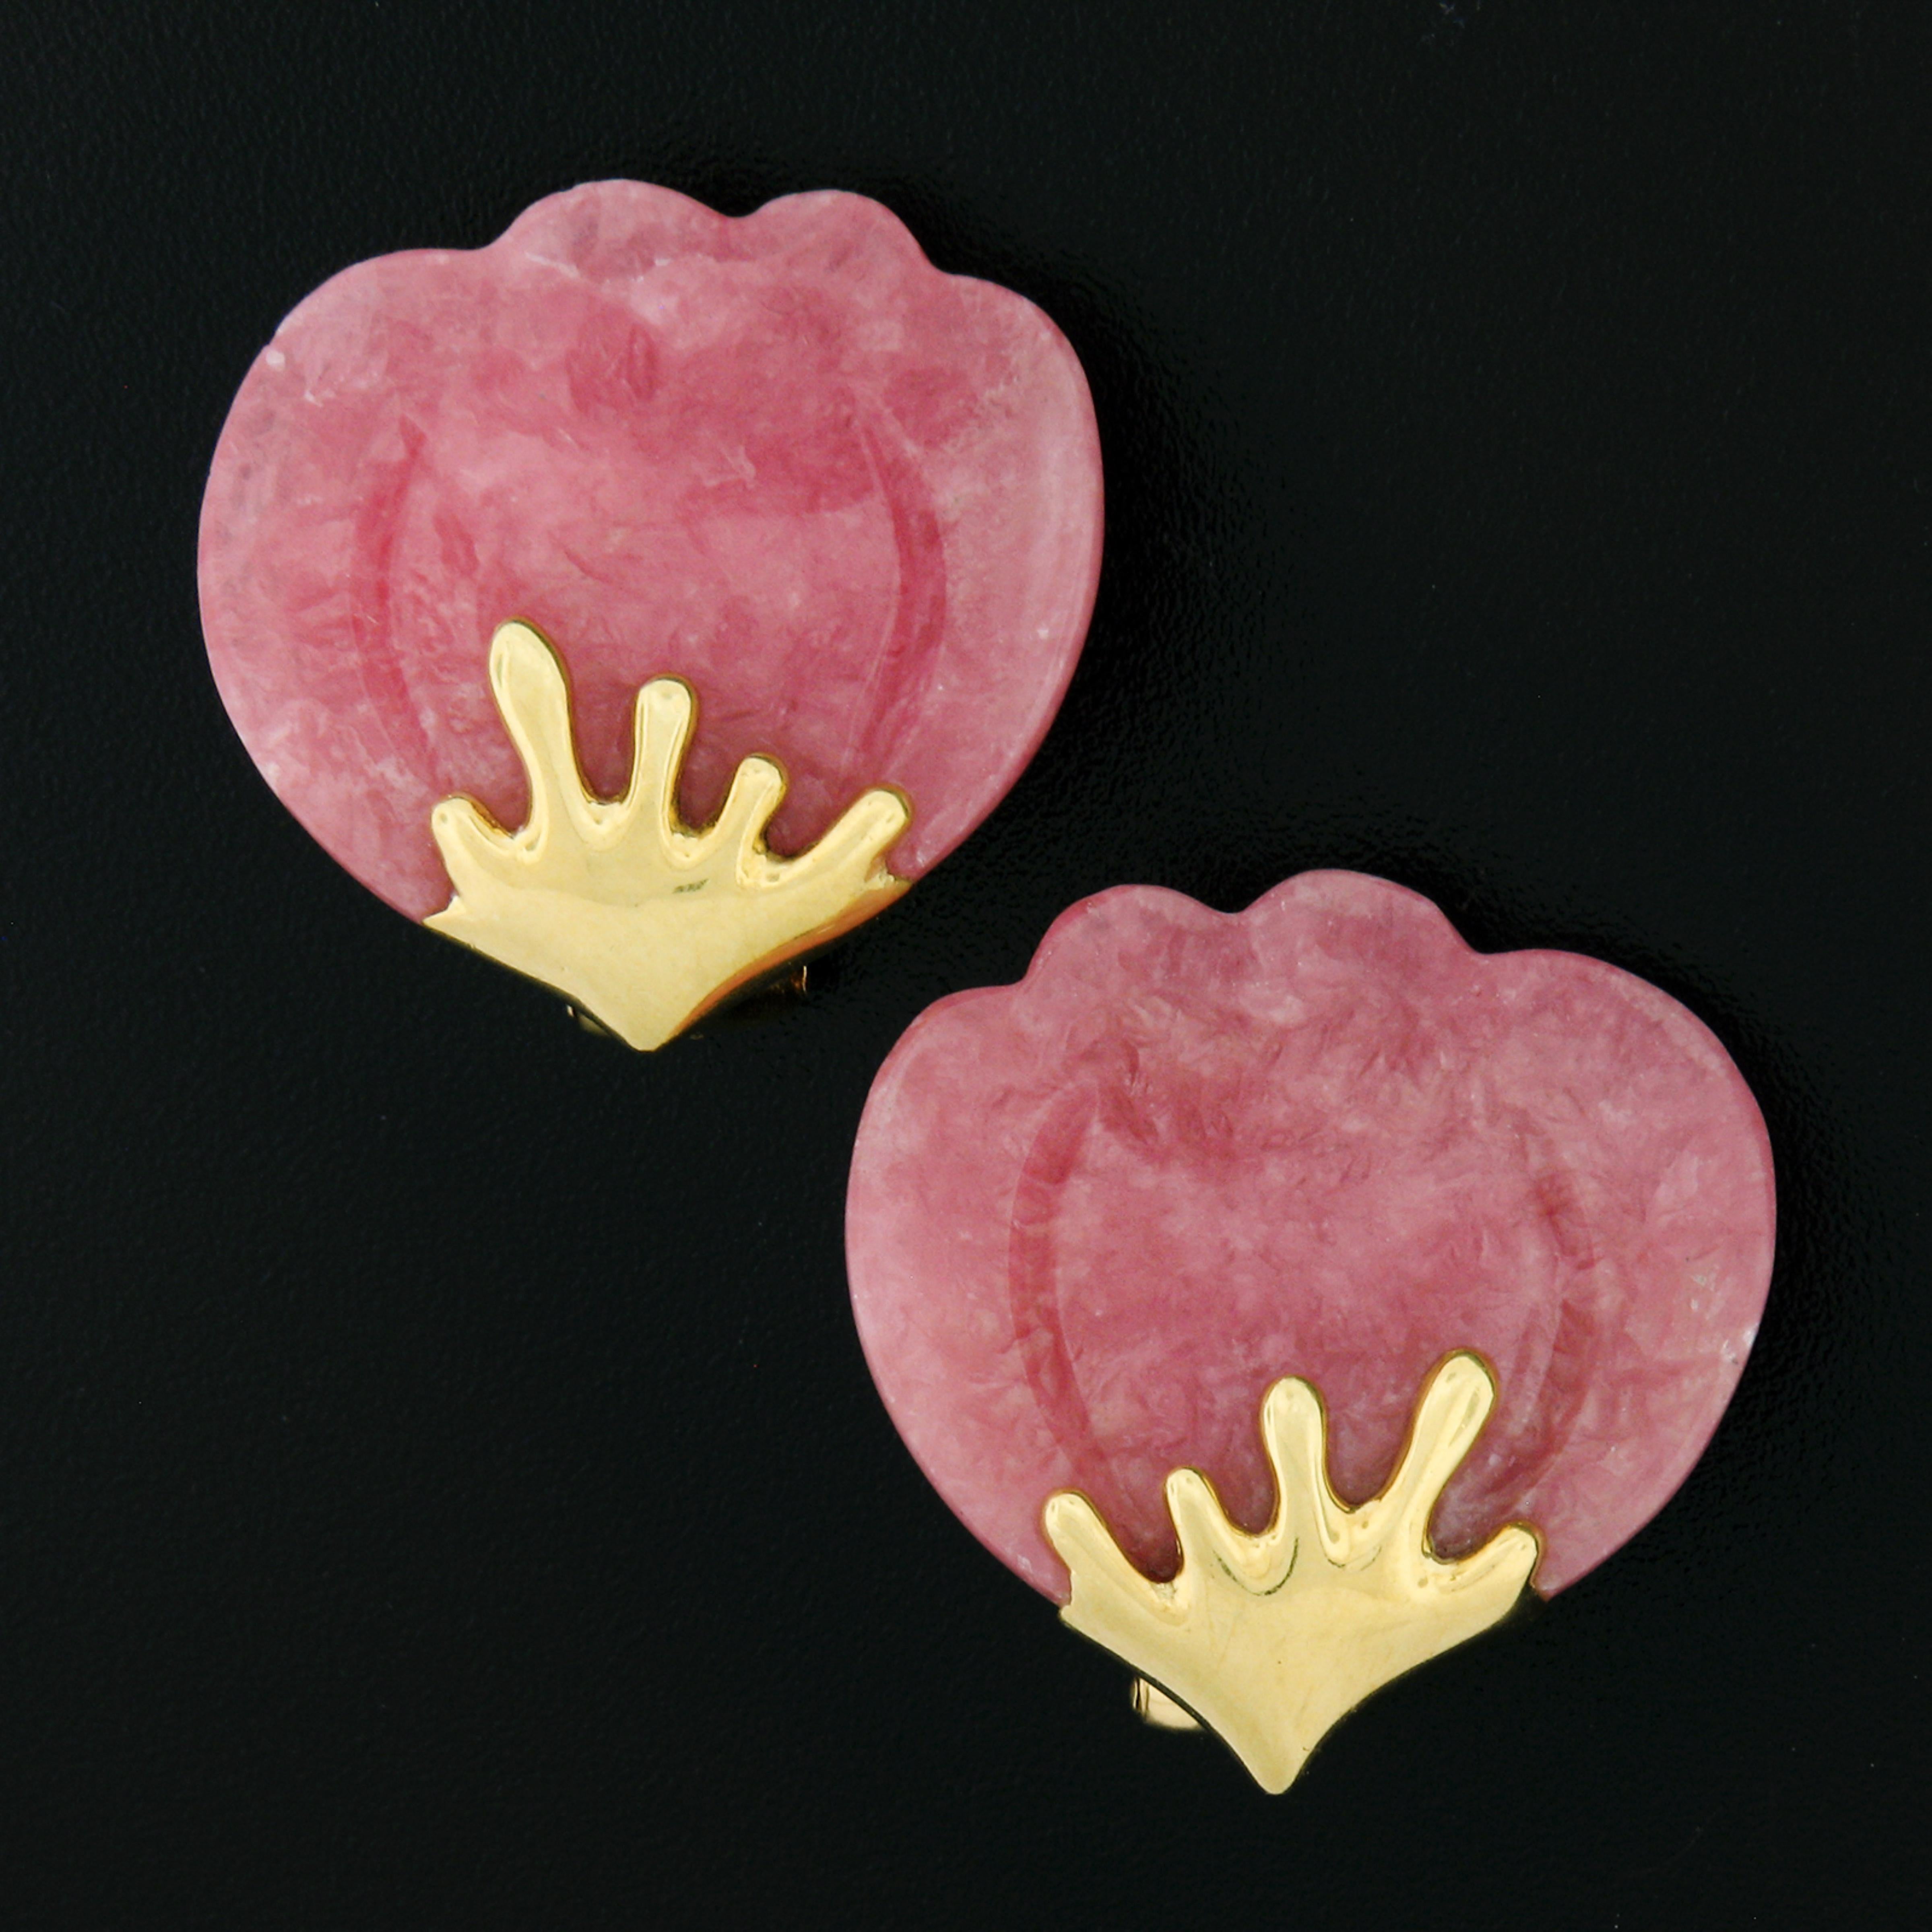 This beautiful vintage pair of Tiffany & Co. earrings features two gorgeous natural rhodochrosite stones which are well carved into a lotus petal flower design. The rhodochrosite display a pretty and very pleasant pinkish-red color and are nicely